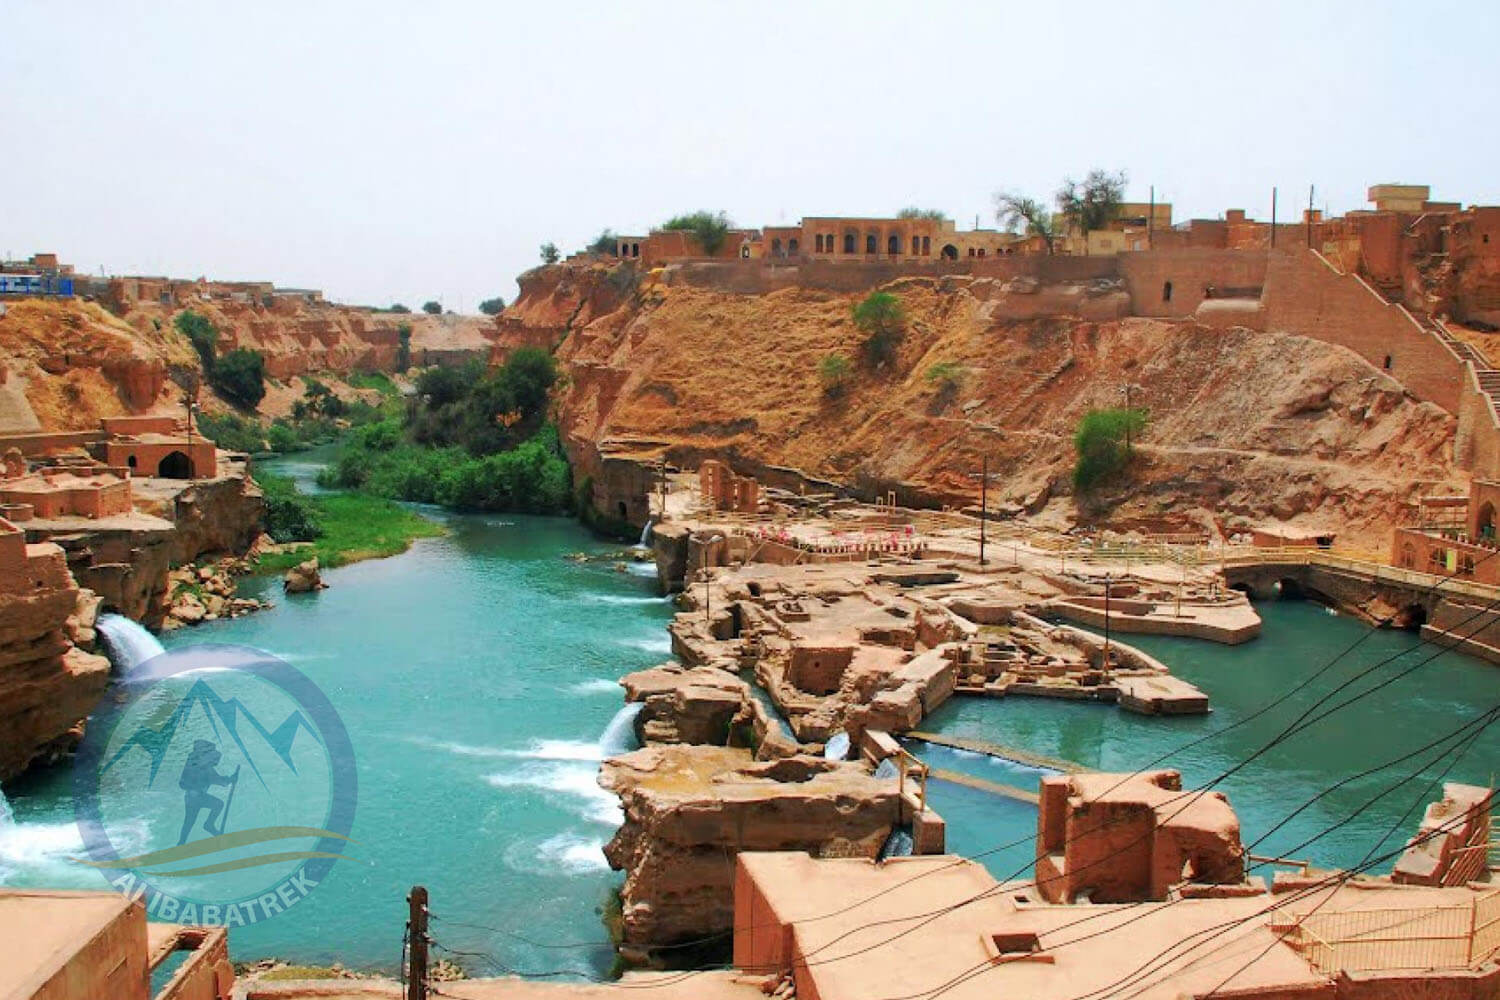 Alibabatrek iran tour packages Khuzestan travel Khuzestan tour iran shushtar travel adadan travel ahvaz tourist attraction abadan sightseeing places to see in Khuzestan Historical Hydraulic System